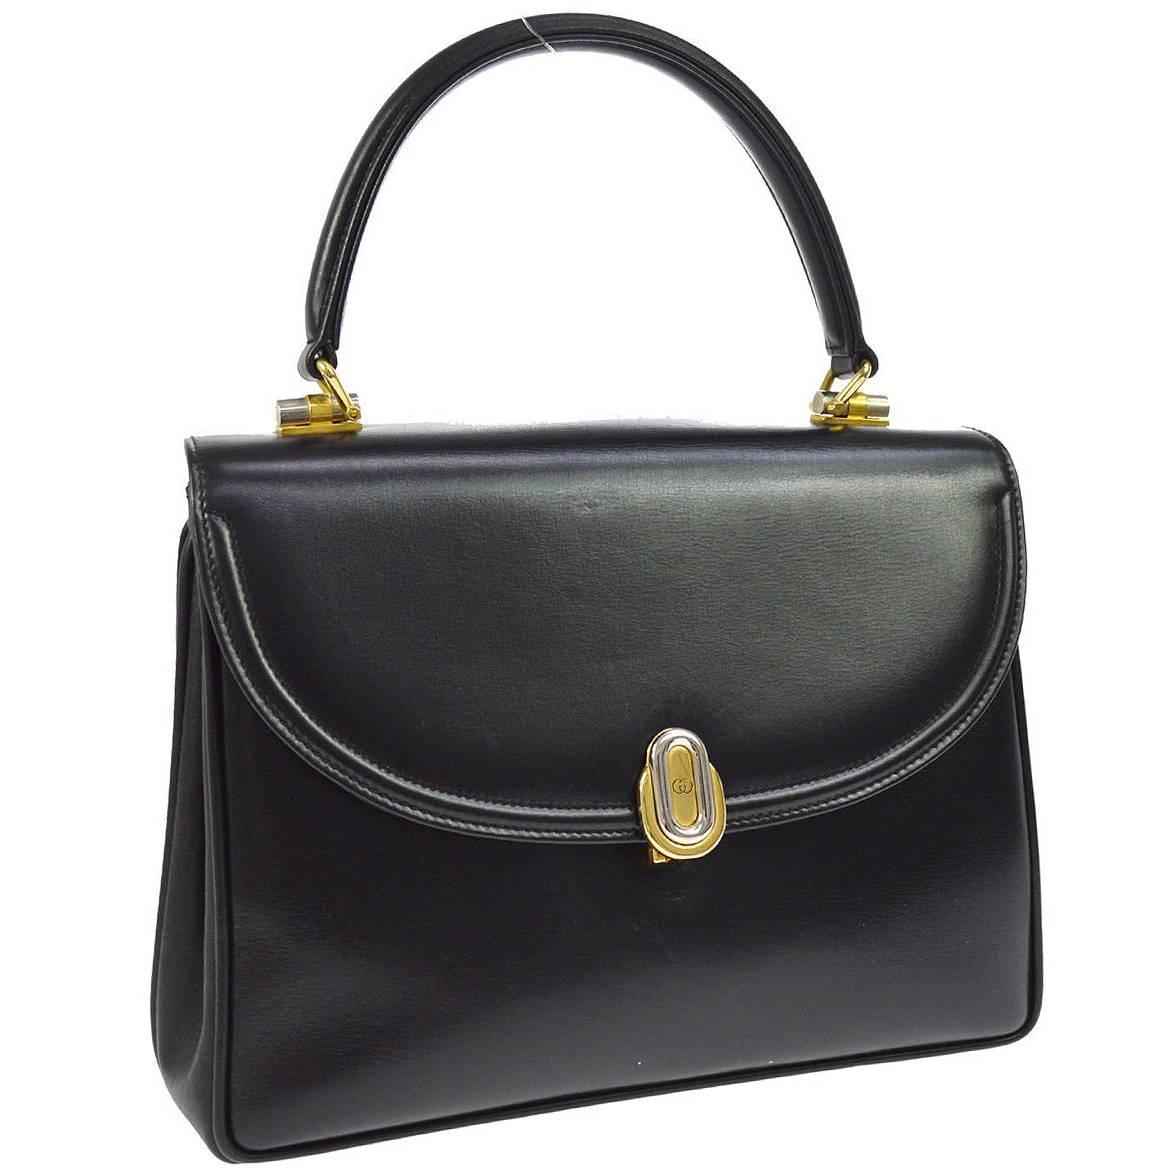 Gucci Black Leather Kelly Style Top Flap Evening Handle Satchel Bag